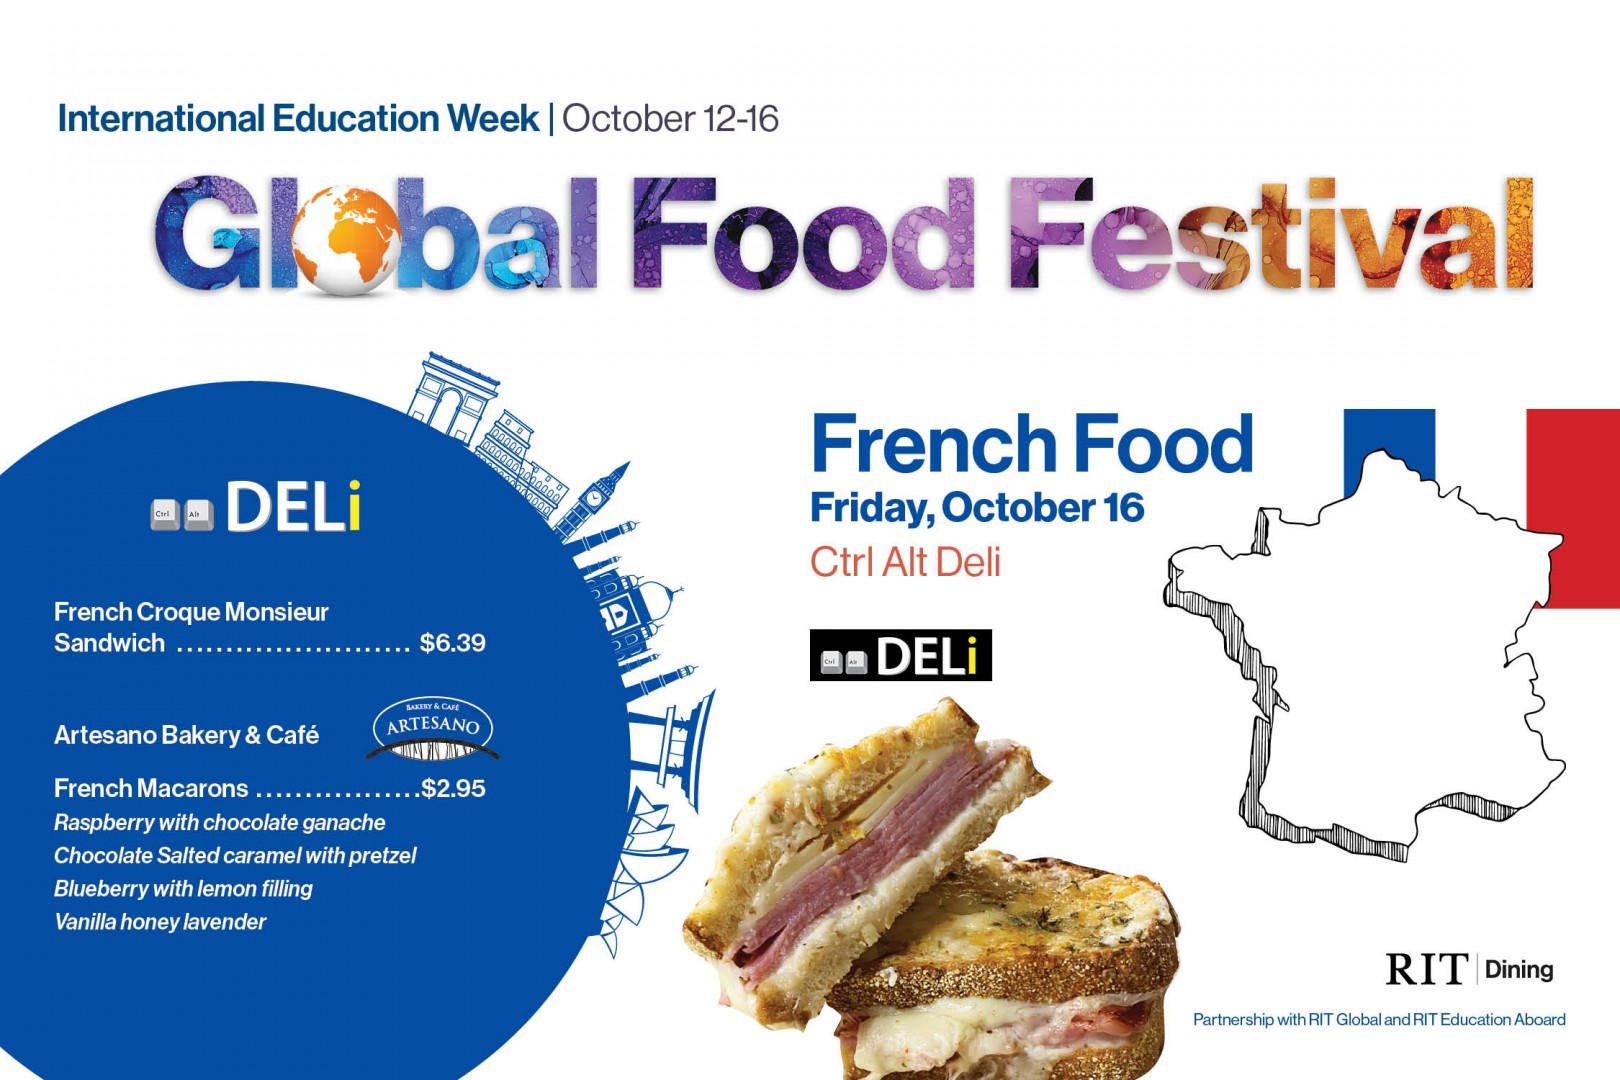 Graphic with text "Global Food Festival", "French Food", and outline of country